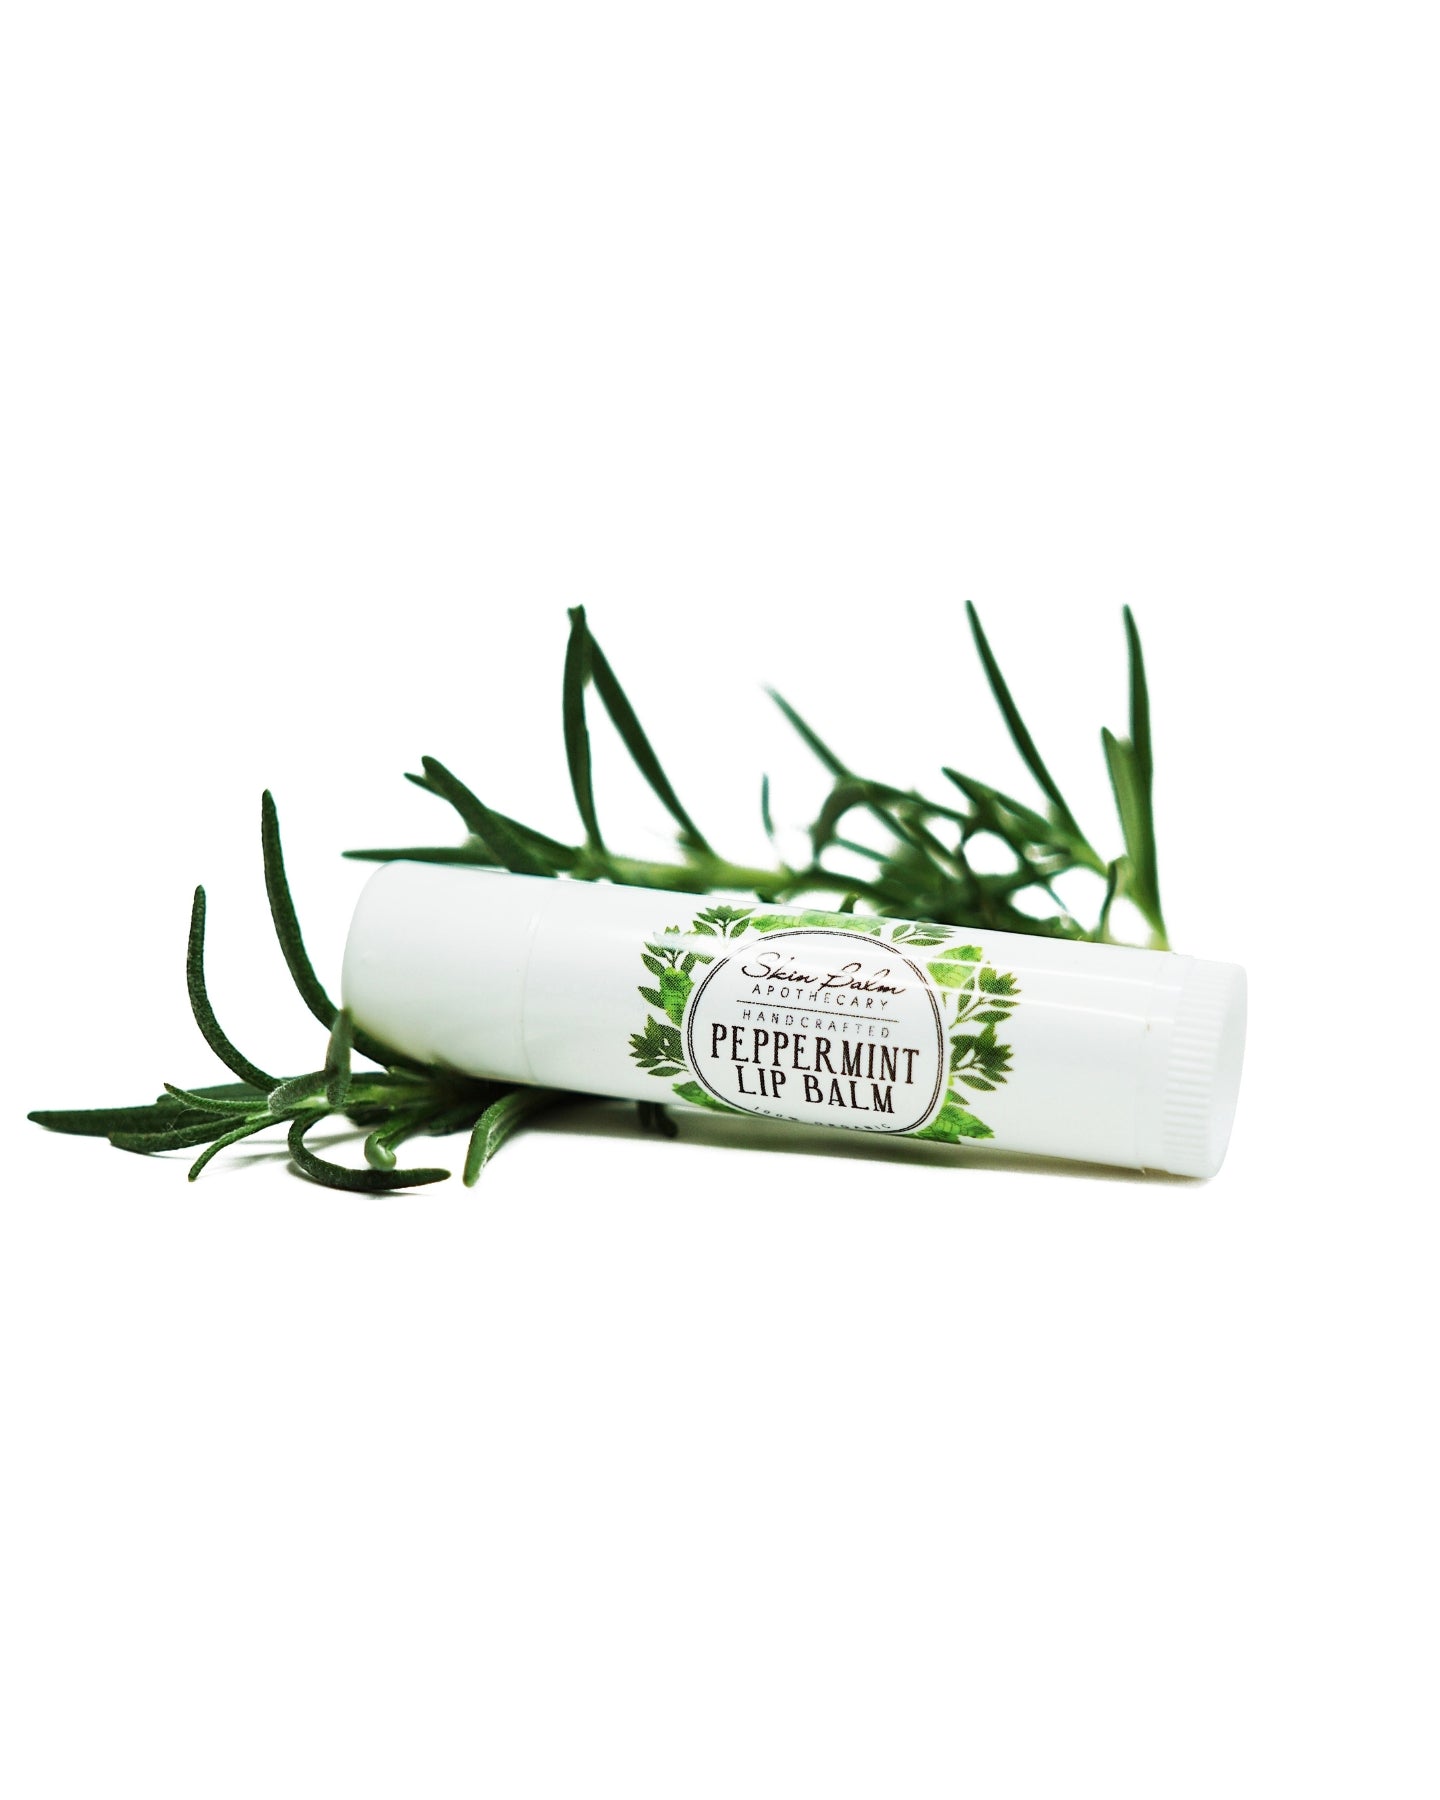 Peppermint Lip Balm with green foliage against a white background.